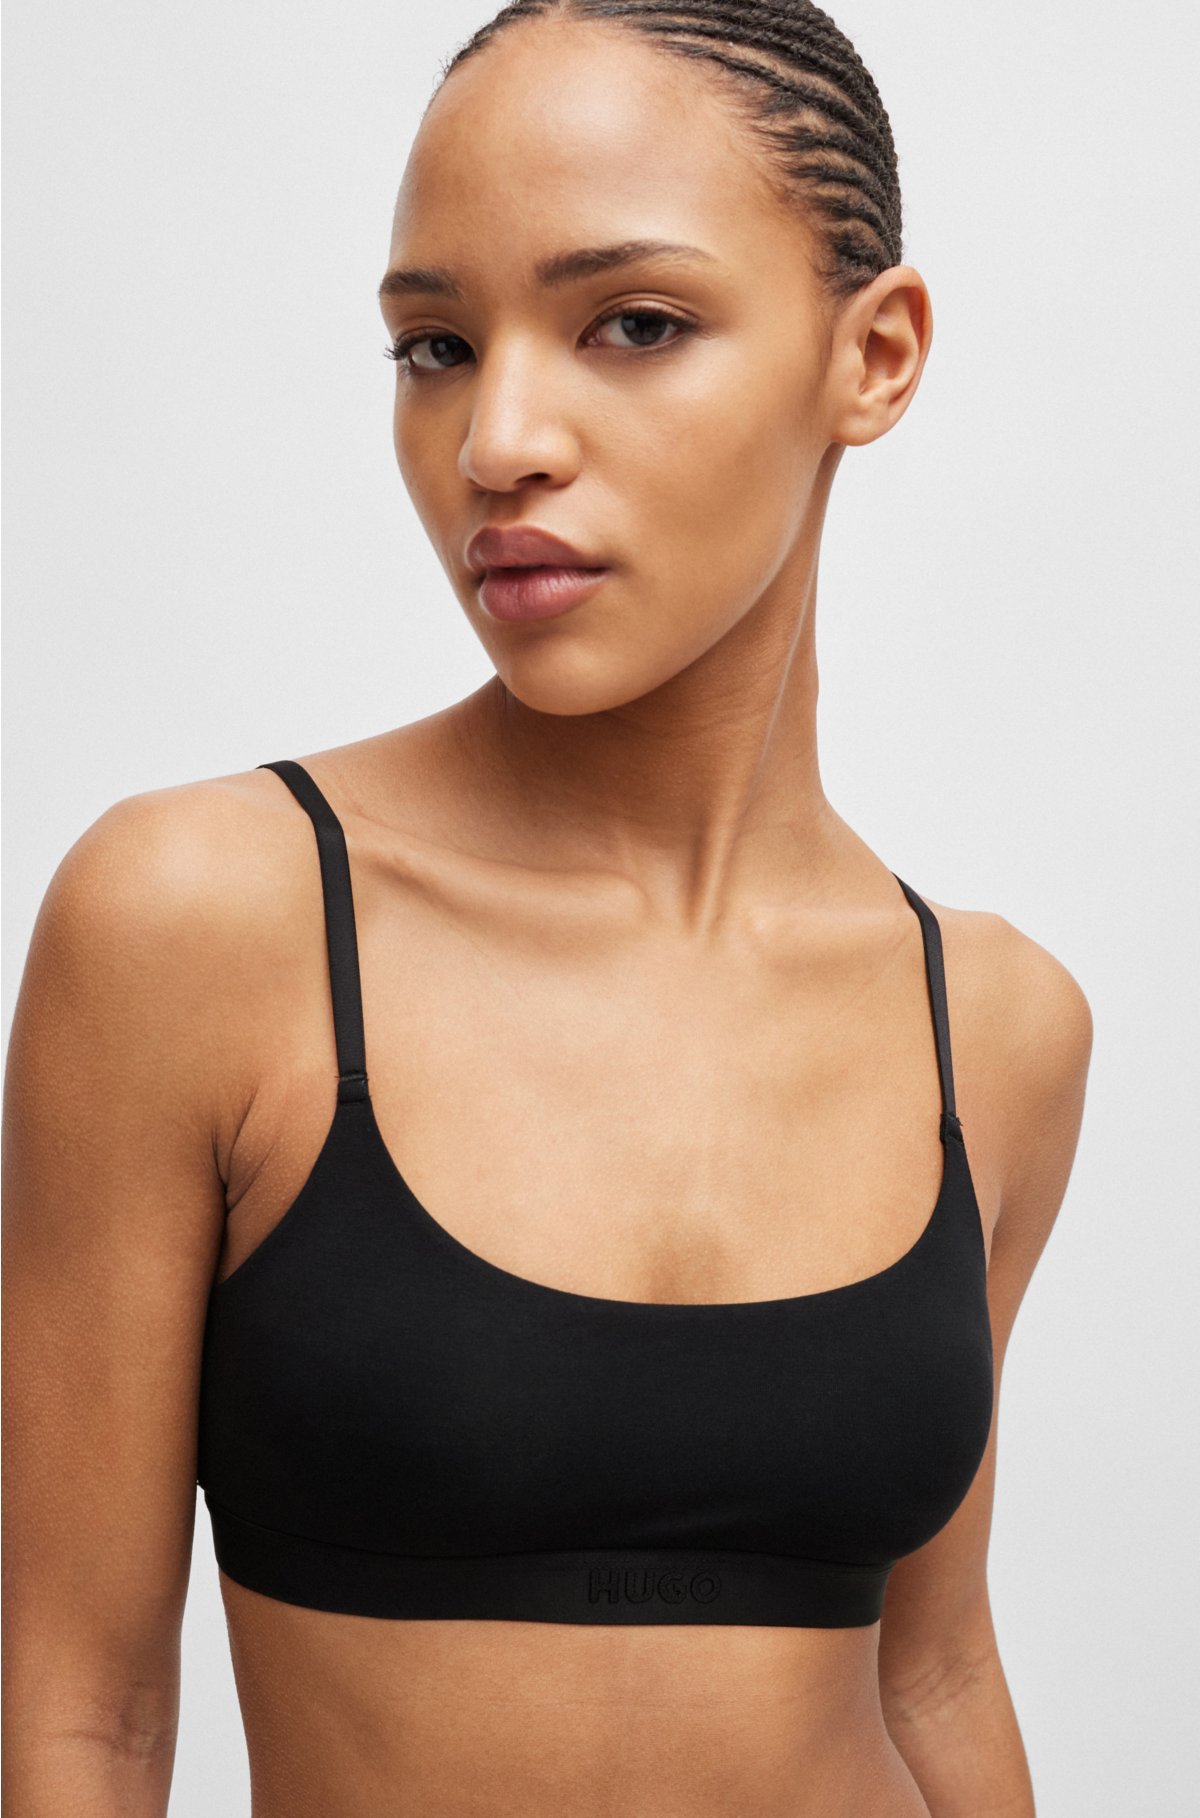 HUGO - Two-pack of stretch-modal bralettes with logo details